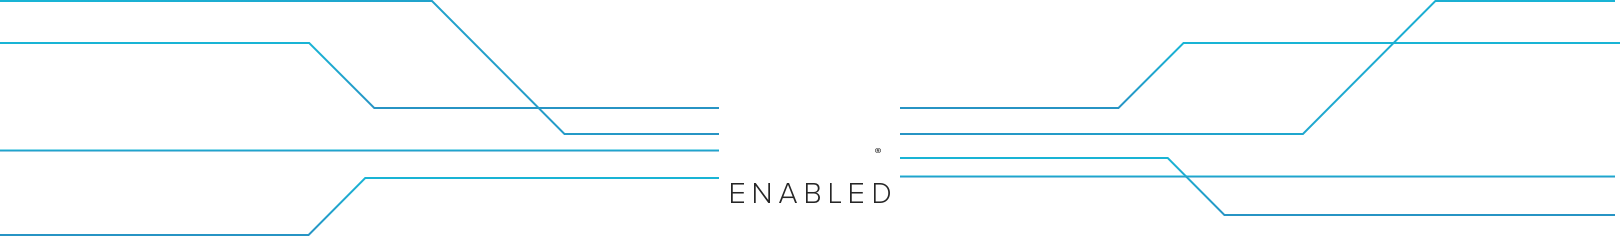 mx enabled logo lines